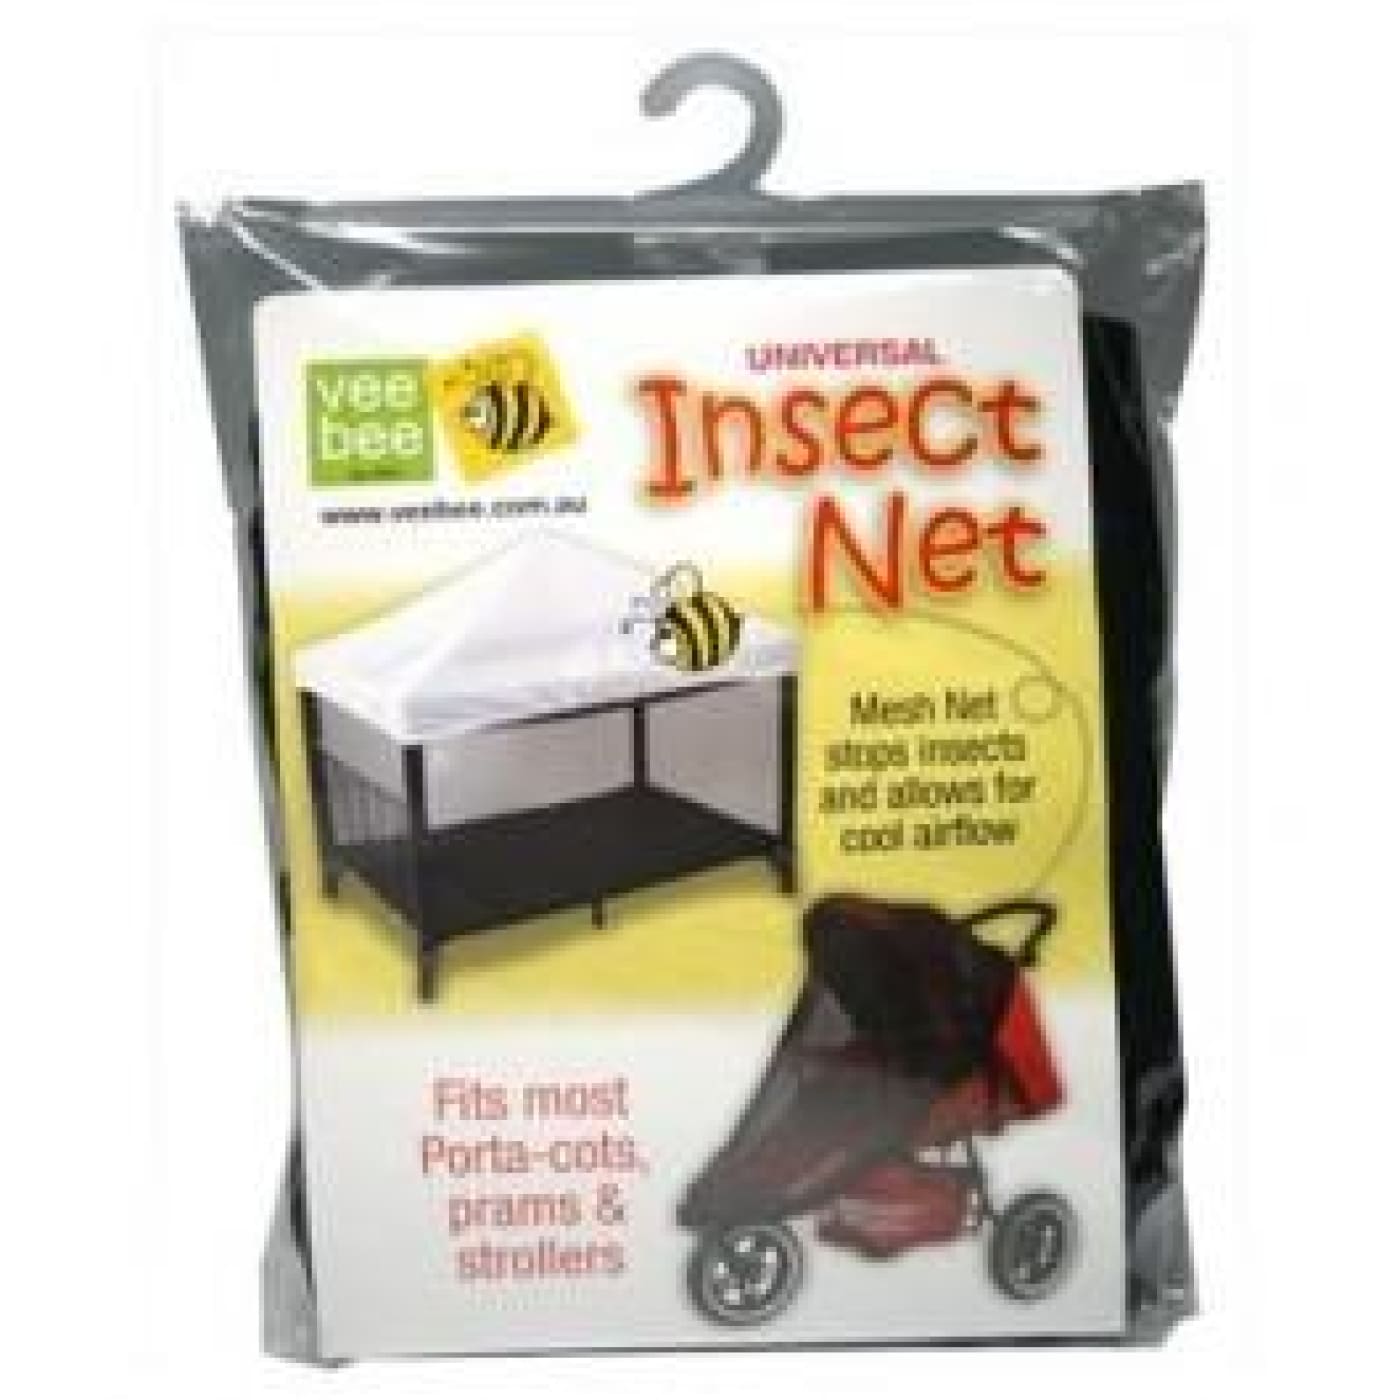 Veebee Mosquito Net - White - PRAMS & STROLLERS - SUN COVERS/WEATHER SHIELDS